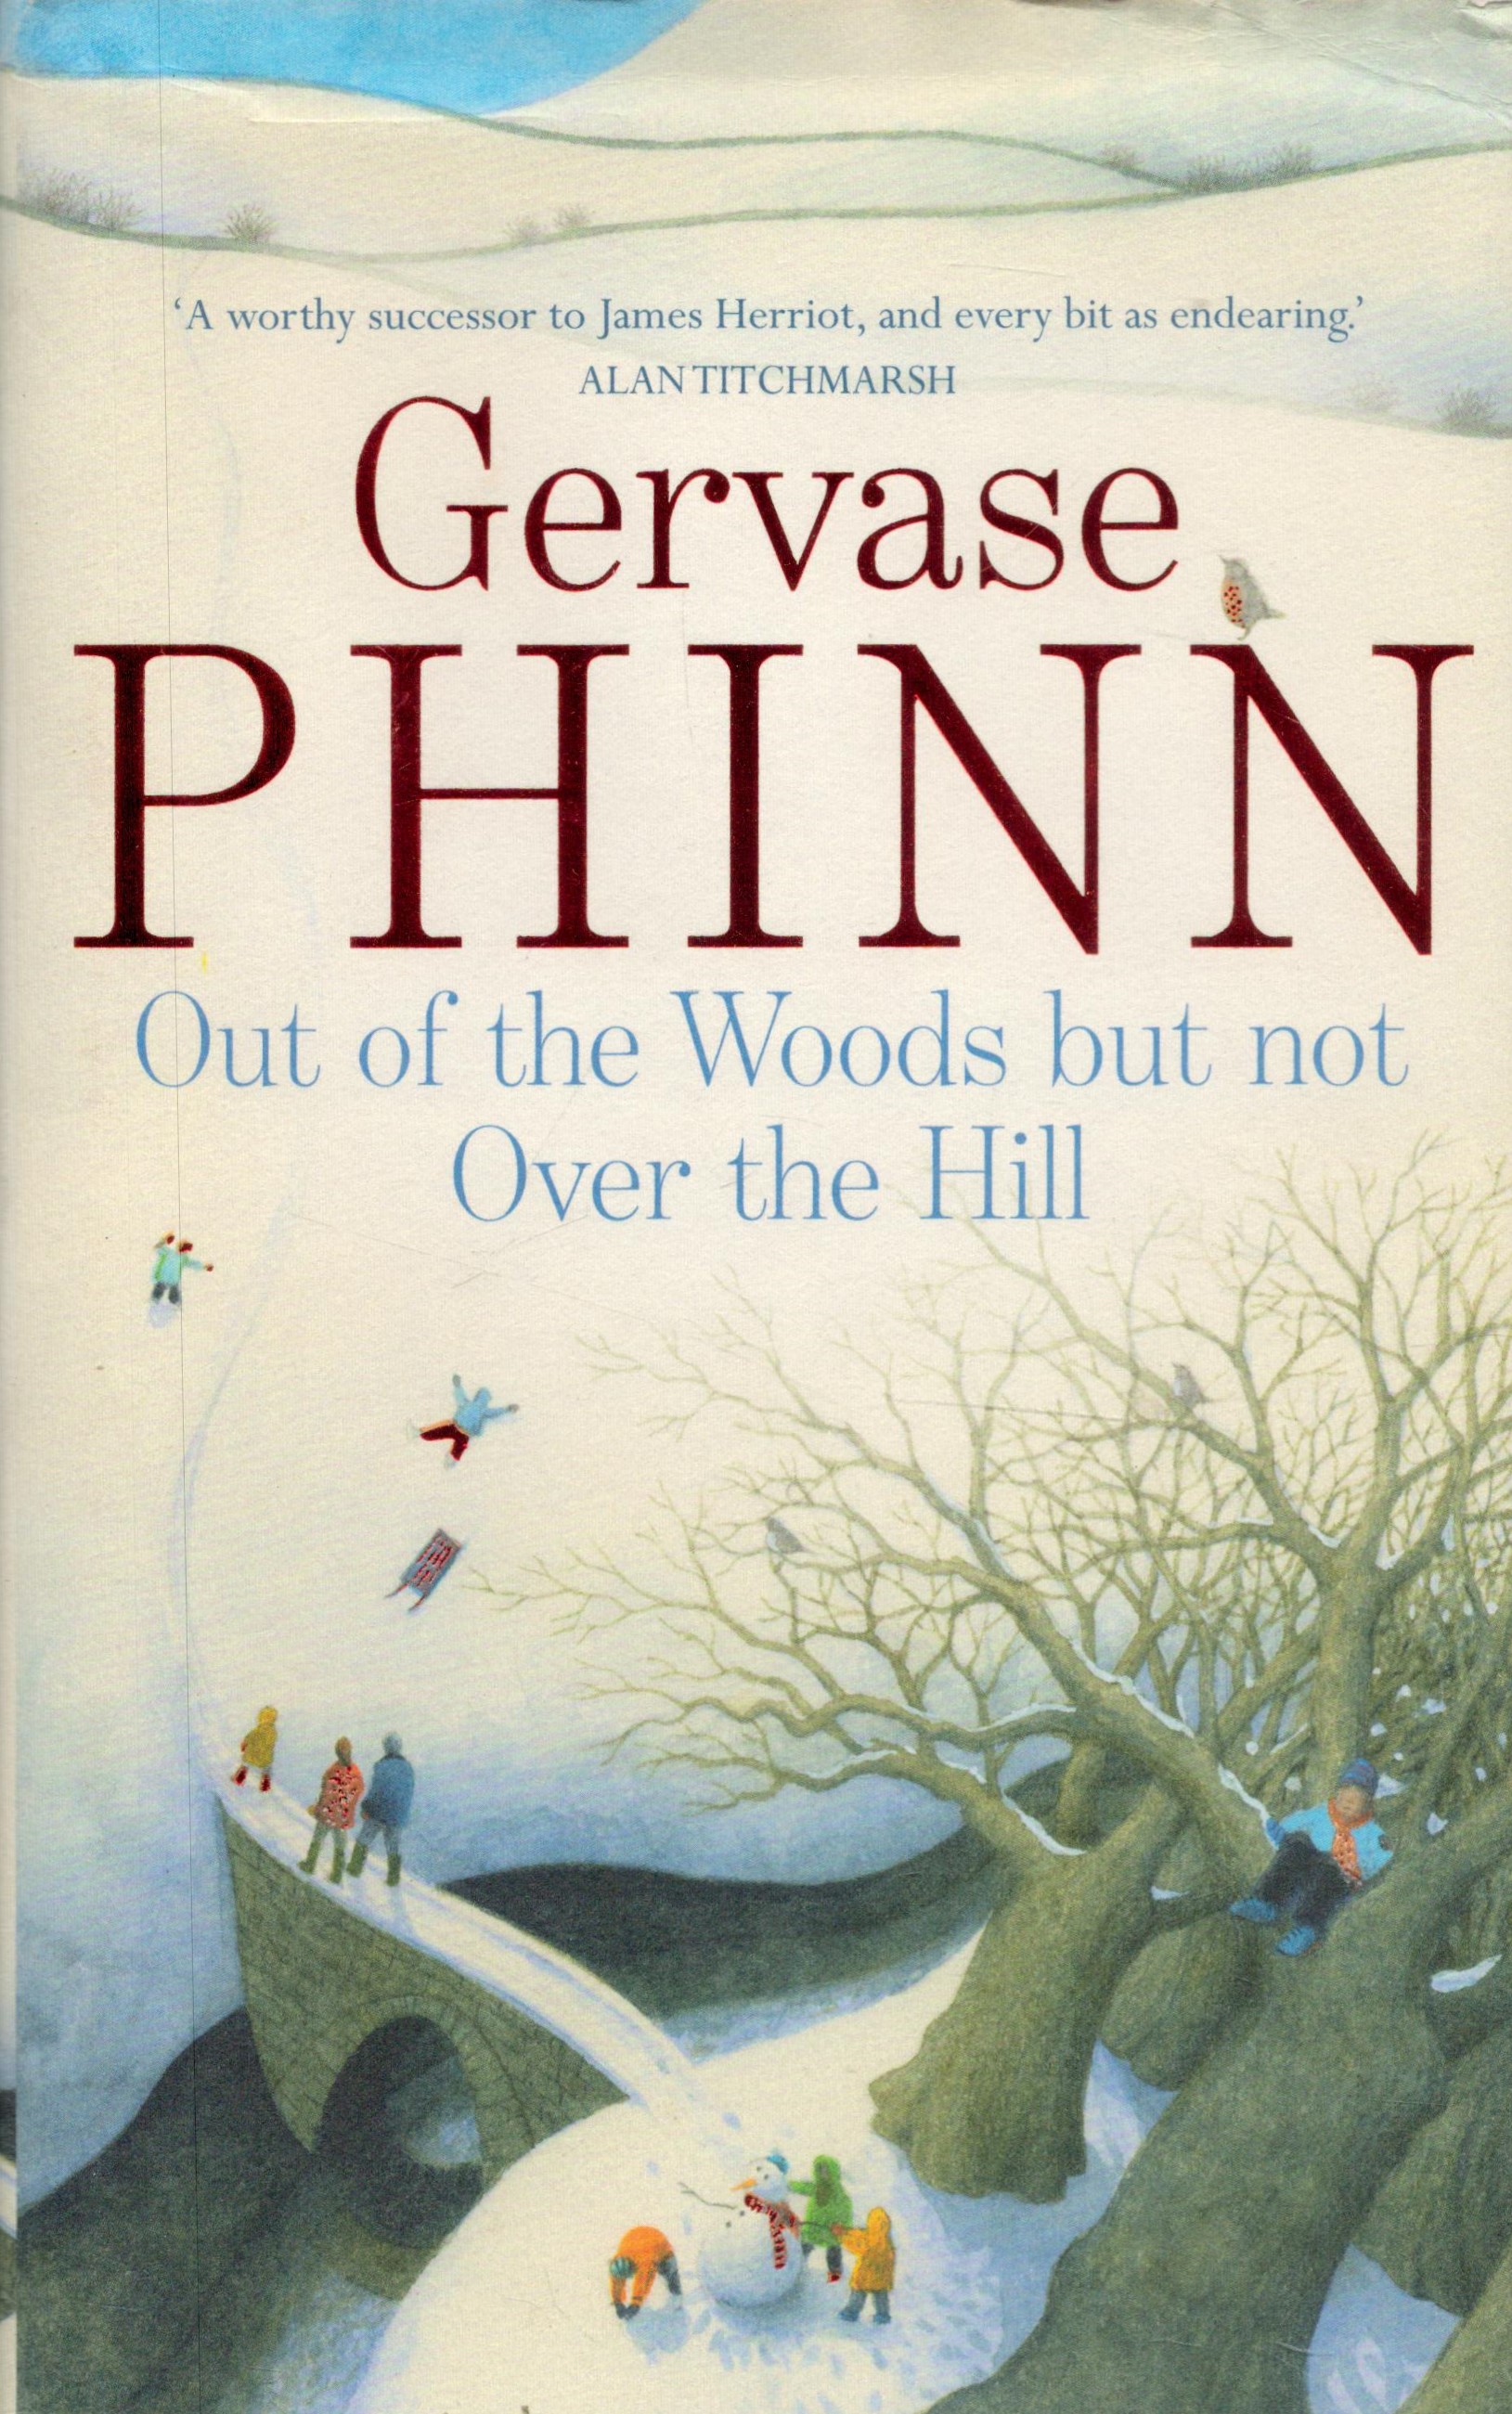 Gervase Phinn Signed Book Out of The Woods but Not Over The Hill by Gervase Phinn 2010 First Edition